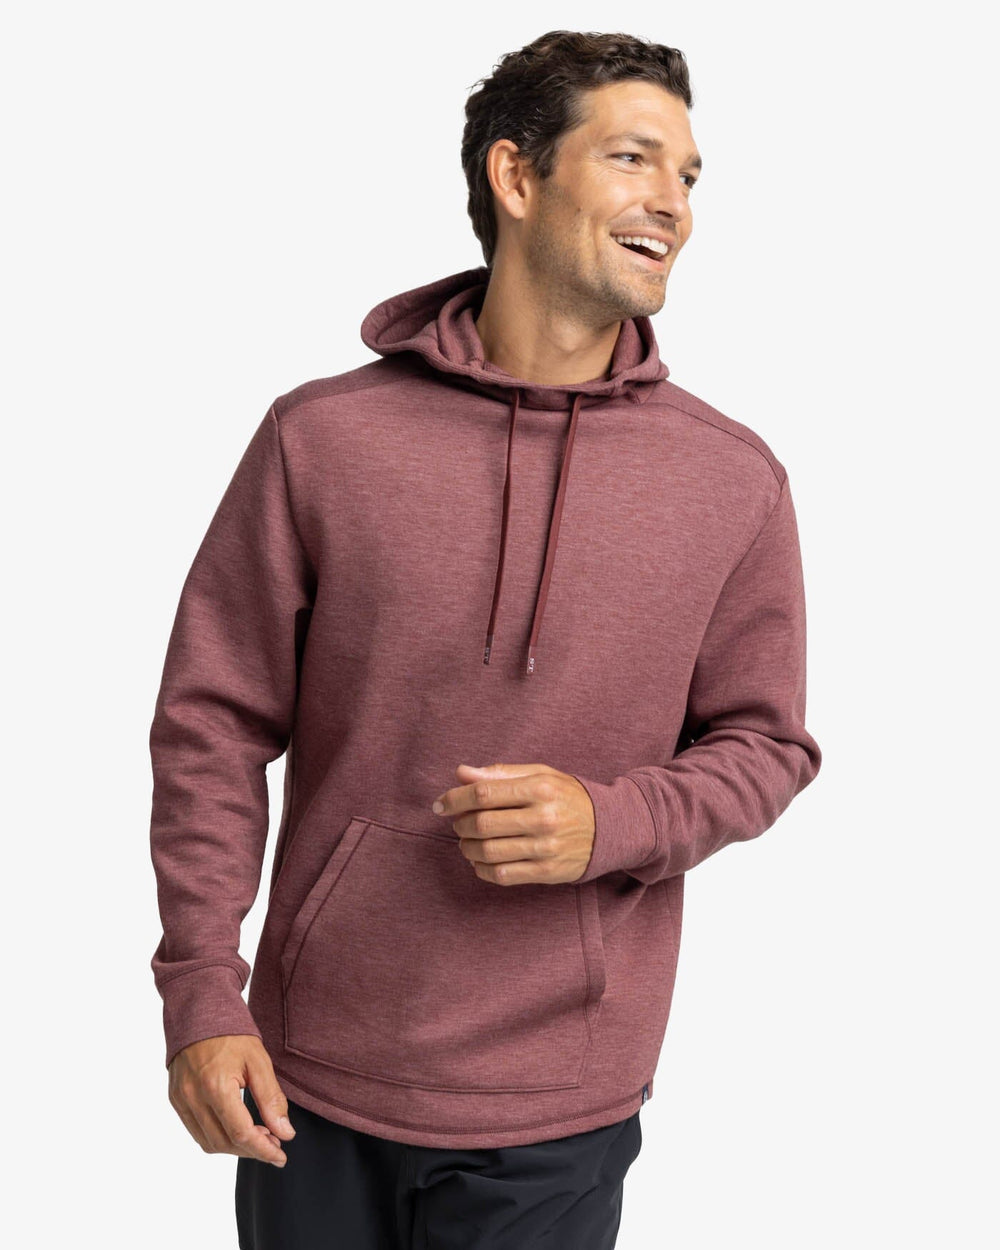 The front view of the Southern Tide Stratford Heather Interlock Hoodie by Southern Tide - Heather Bordeaux Red